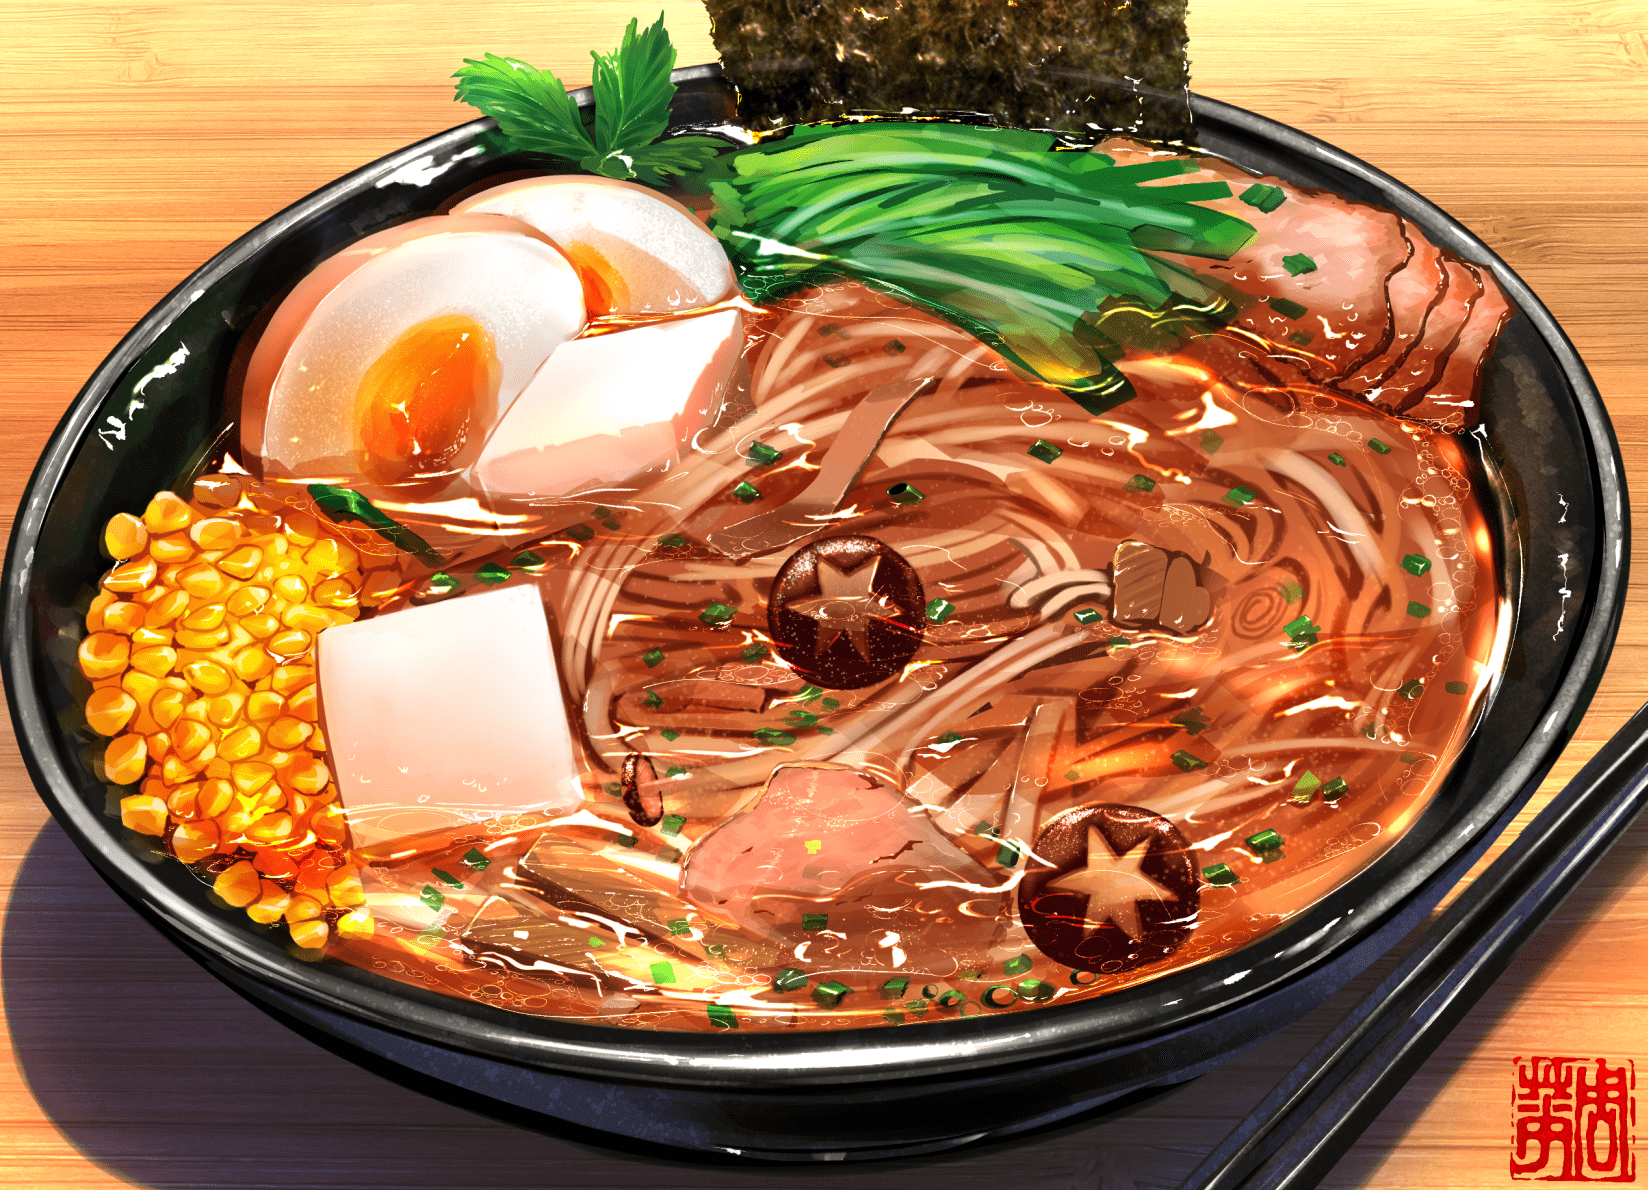 Cooking Anime Wallpapers - Top Free Cooking Anime Backgrounds ...